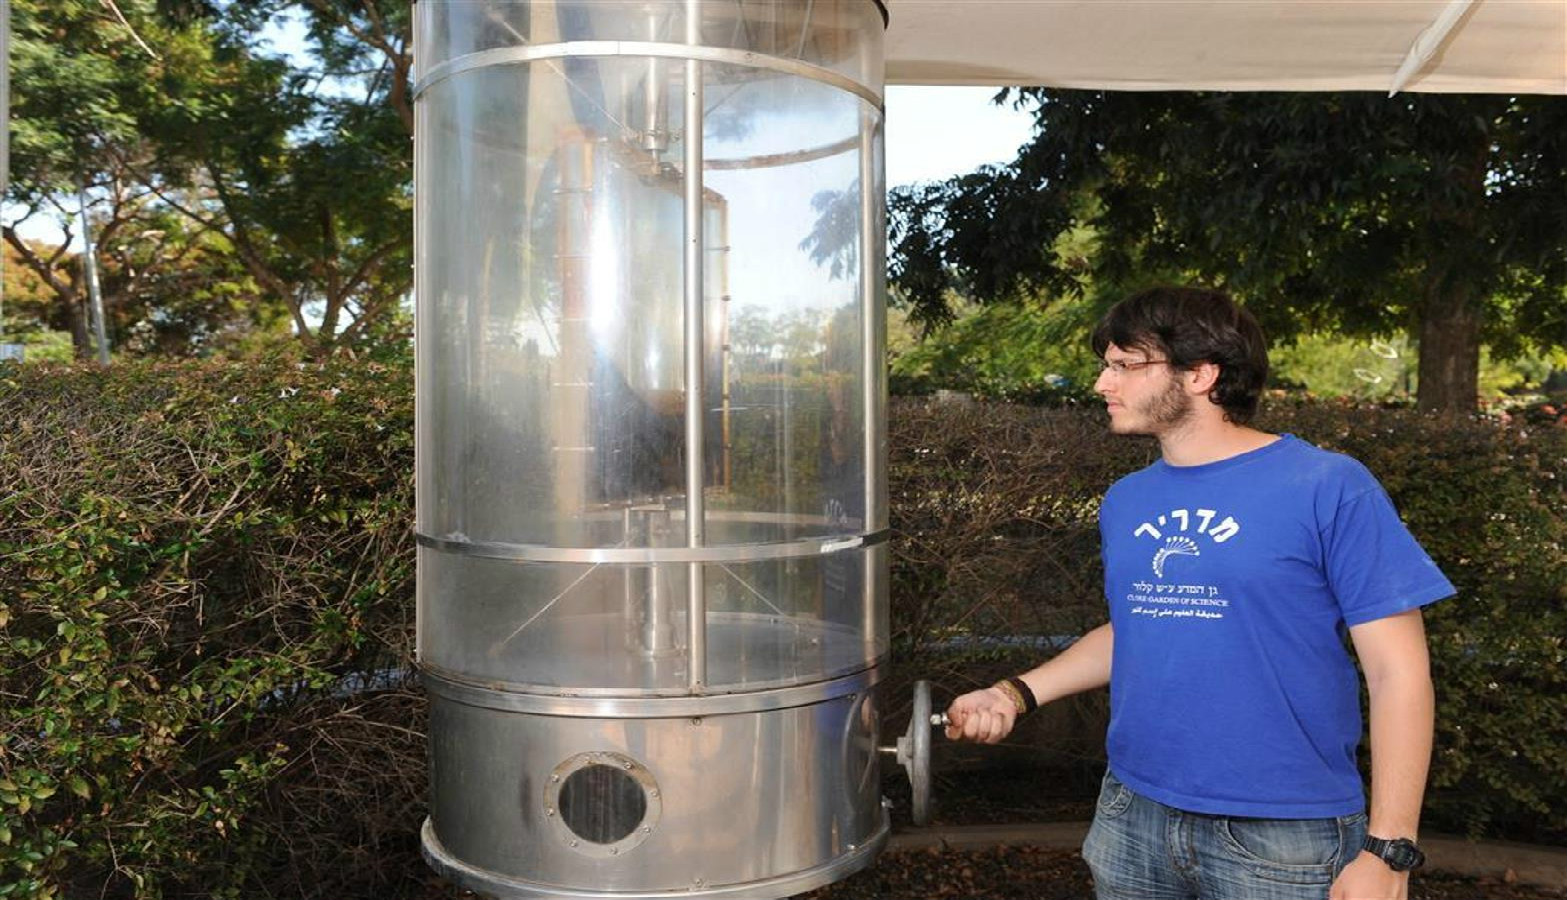 A water centrifuge in the Clore Garden of Science at the Weizmann Institute, Rehovot. Photo by Liora Goldman